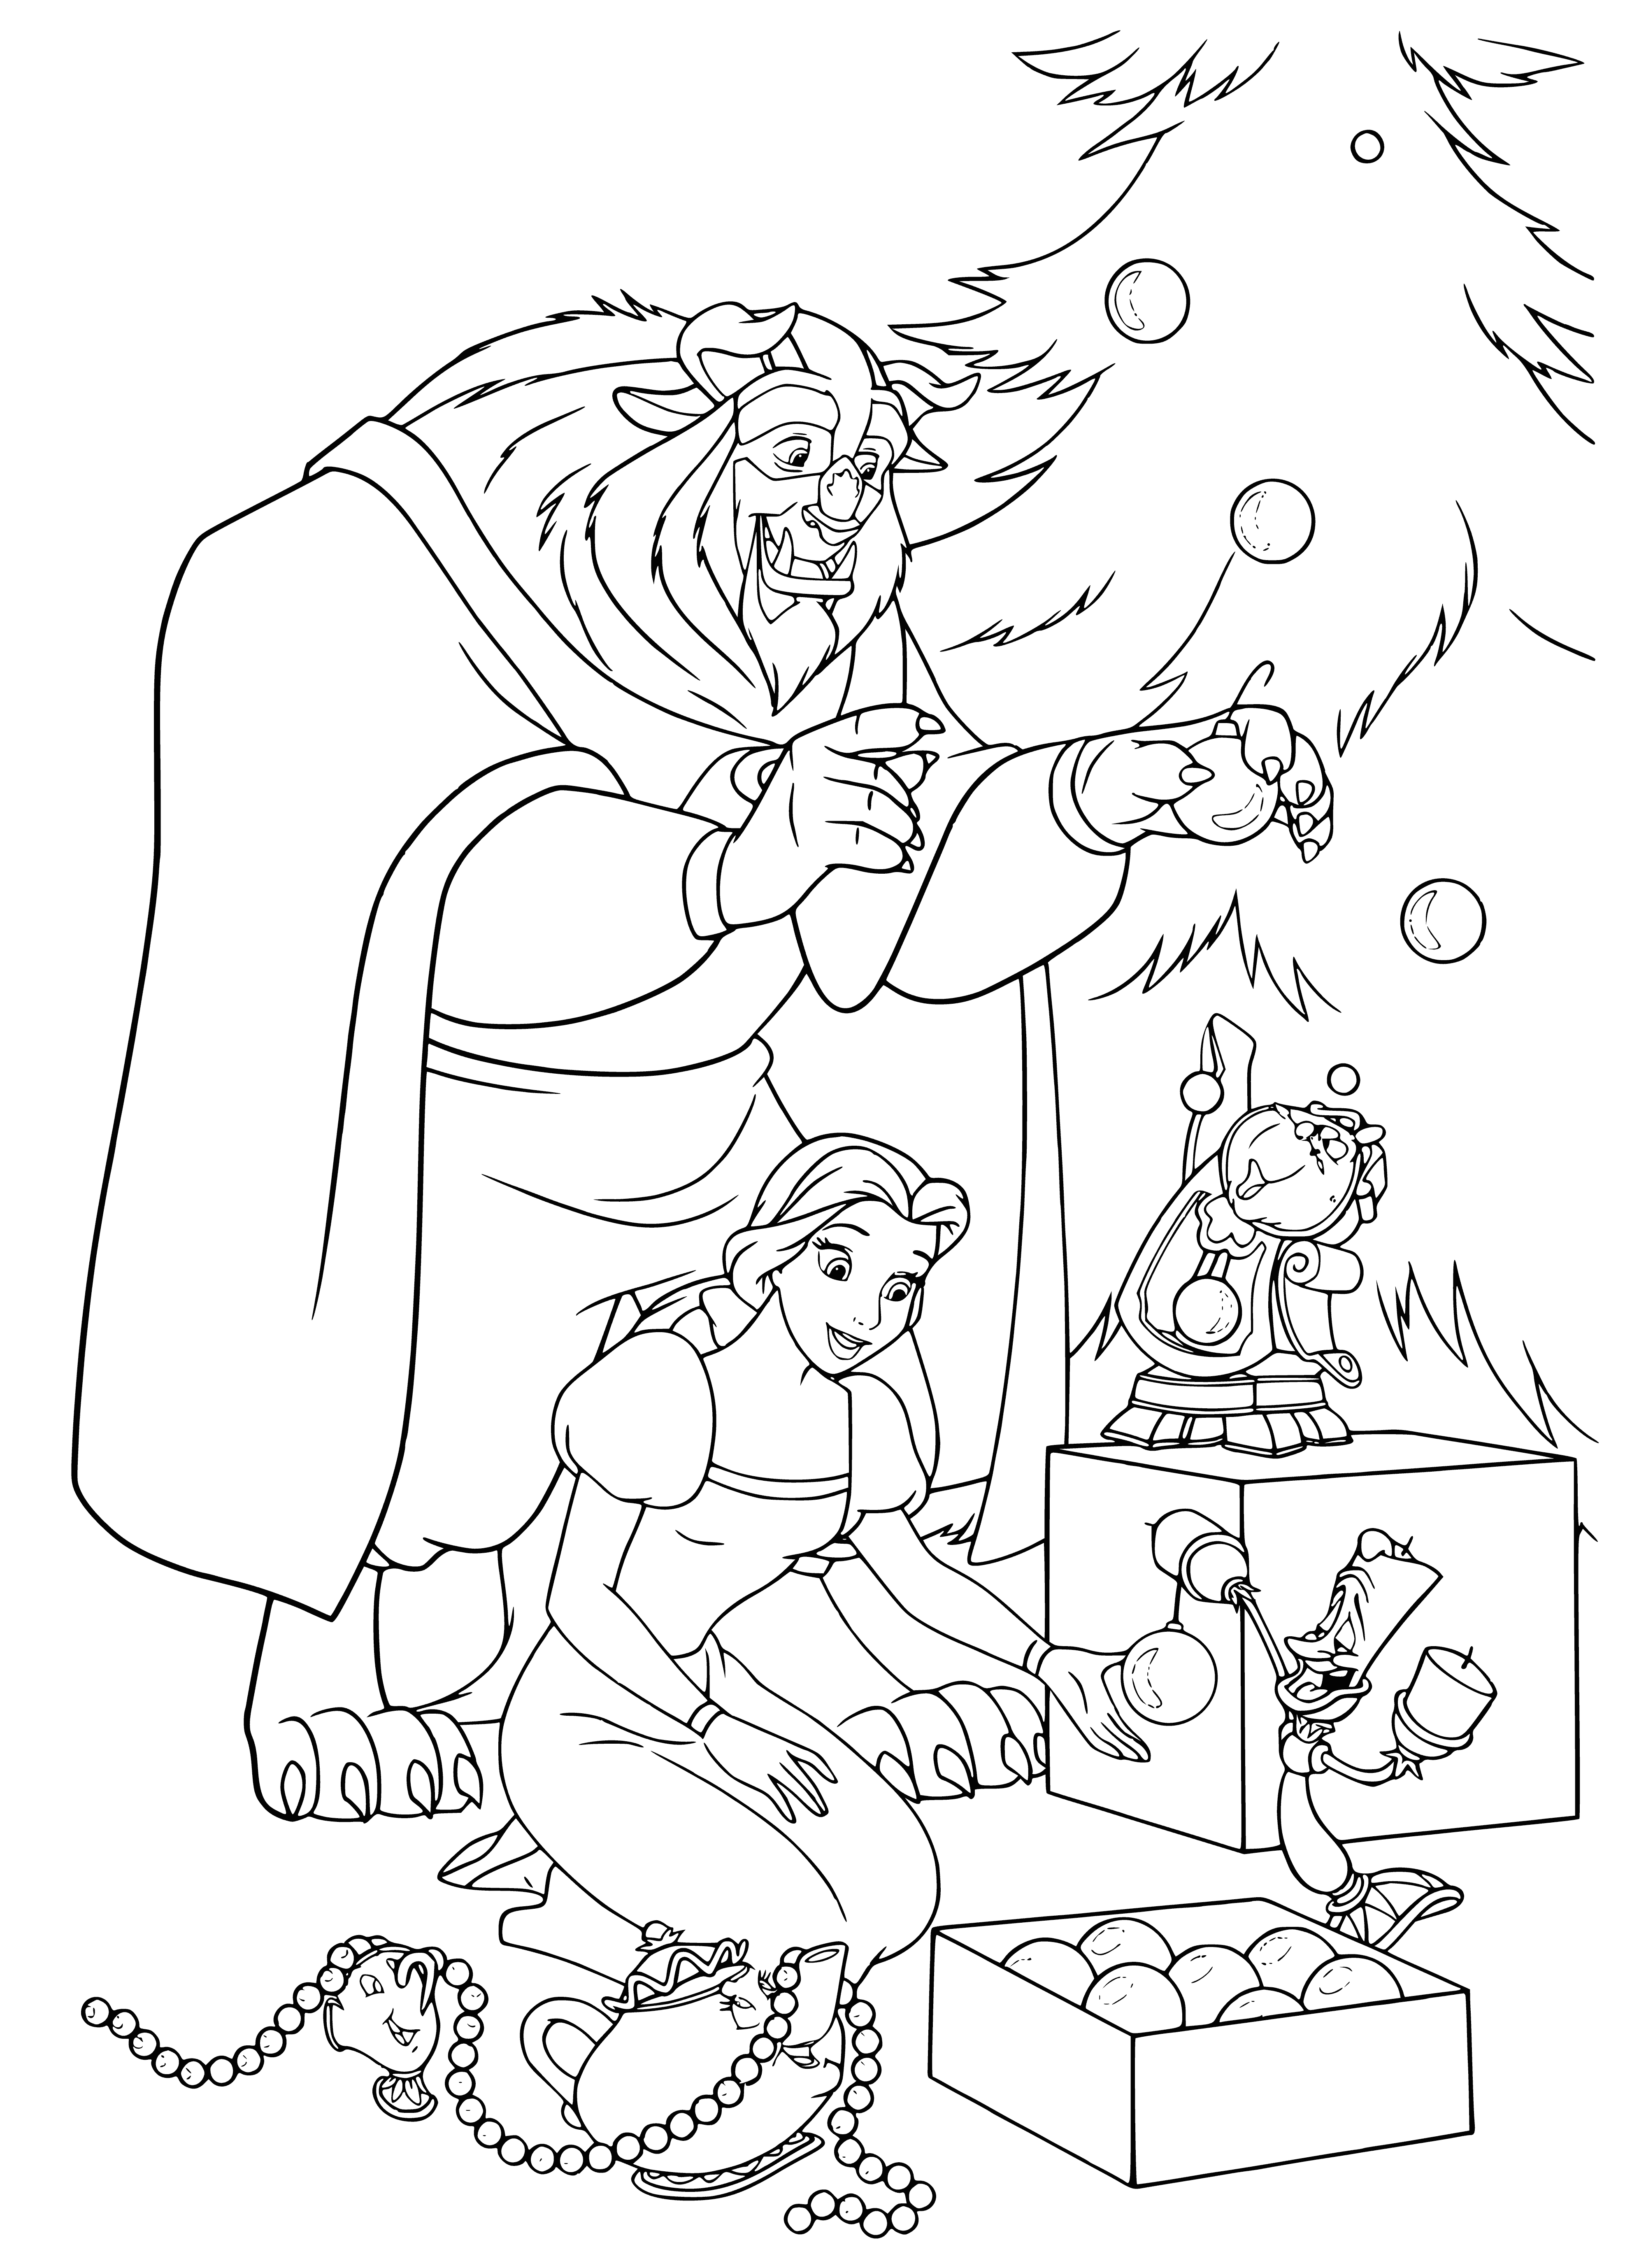 coloring page: Belle and the Beast celebrate the New Year surrounded by magical decorations and presents, content in their love for each other.